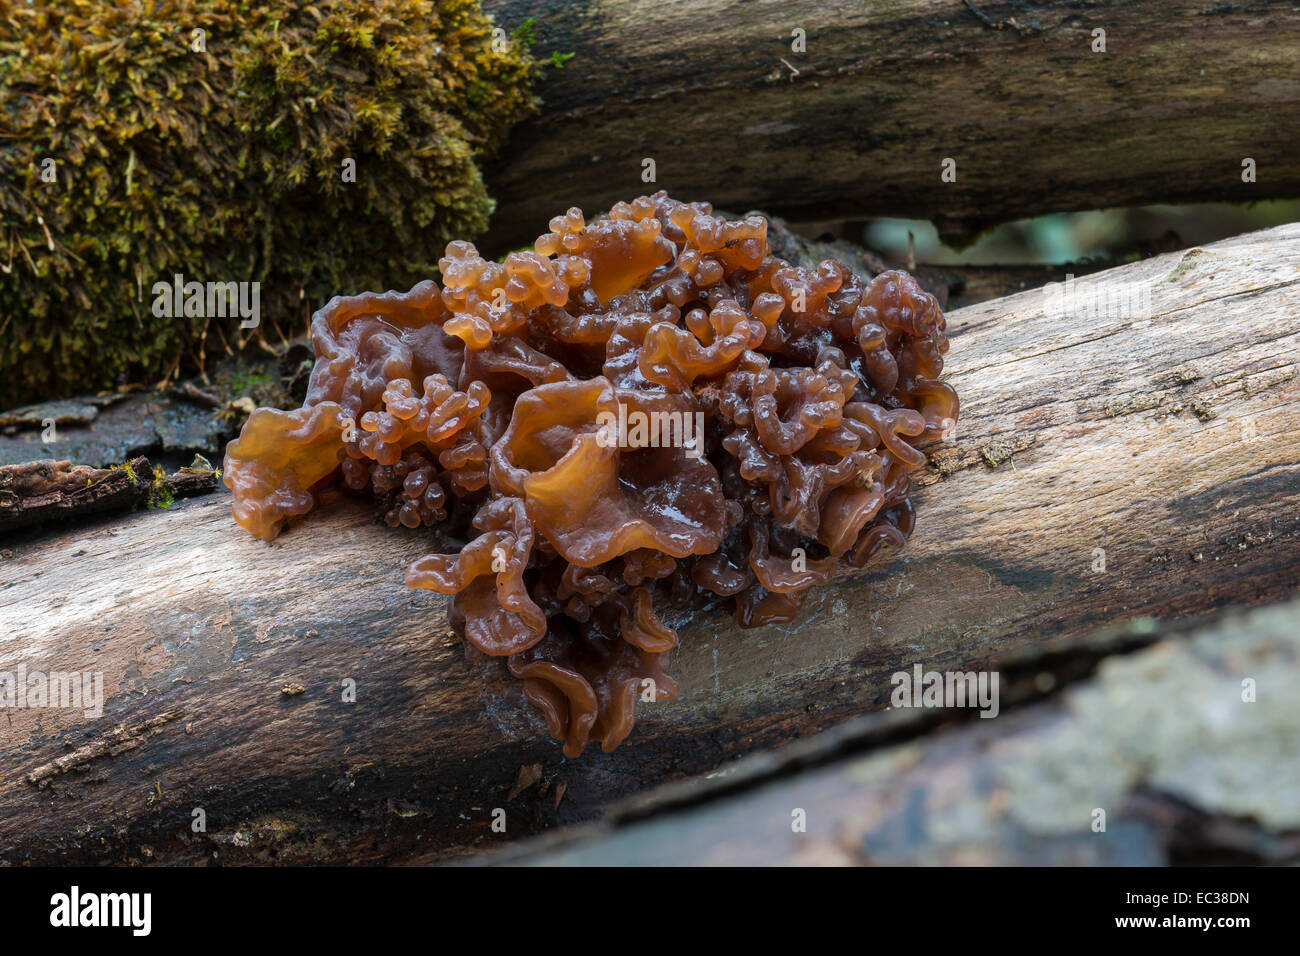 Leafy brain (Tremella foliacea), fruiting bodies on dead wood, Mönchbruch Nature Reserve, Hesse, Germany Stock Photo